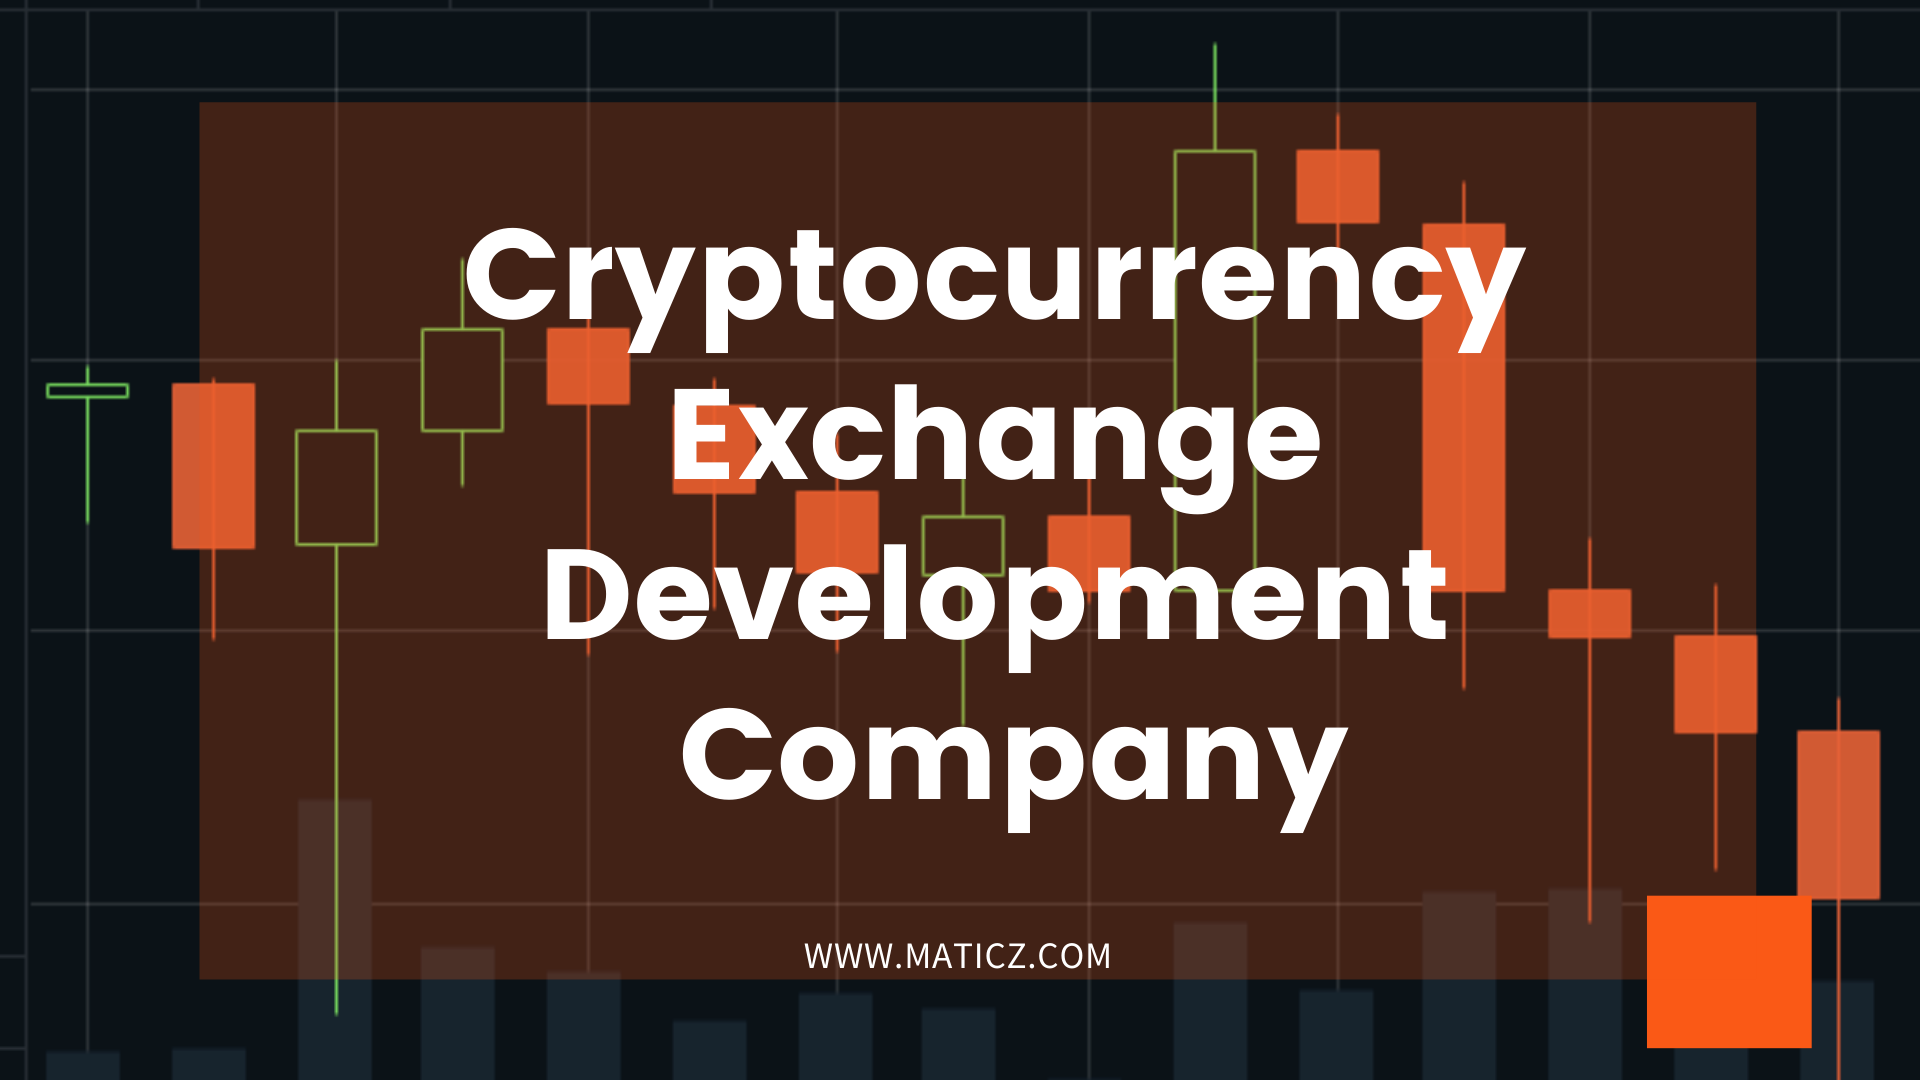 Article about Cryptocurrency Exchange Development Company